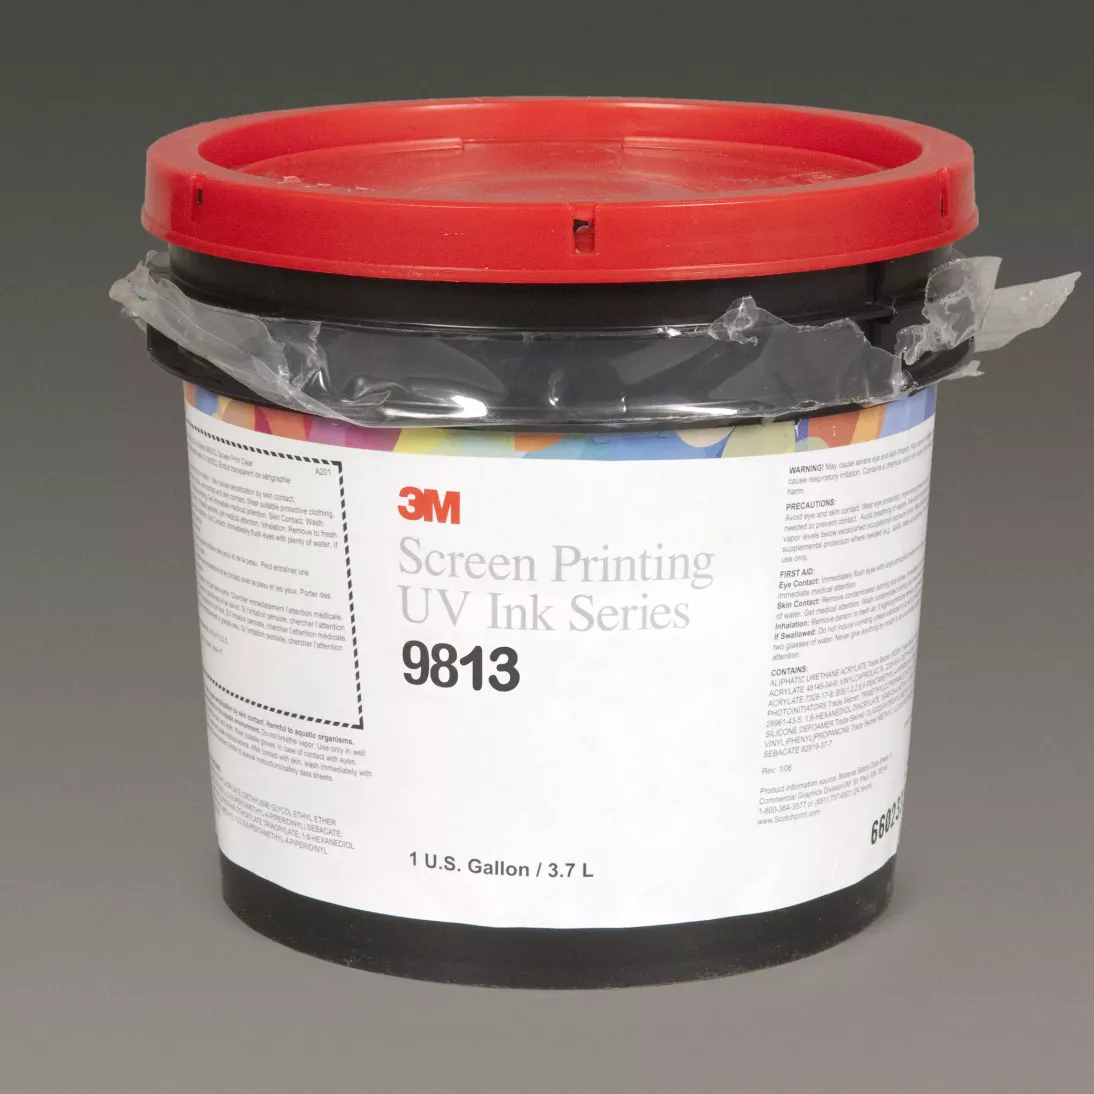 3M™ Screen Printing UV Ink 9813, Red Violet, 1 Gallon Container